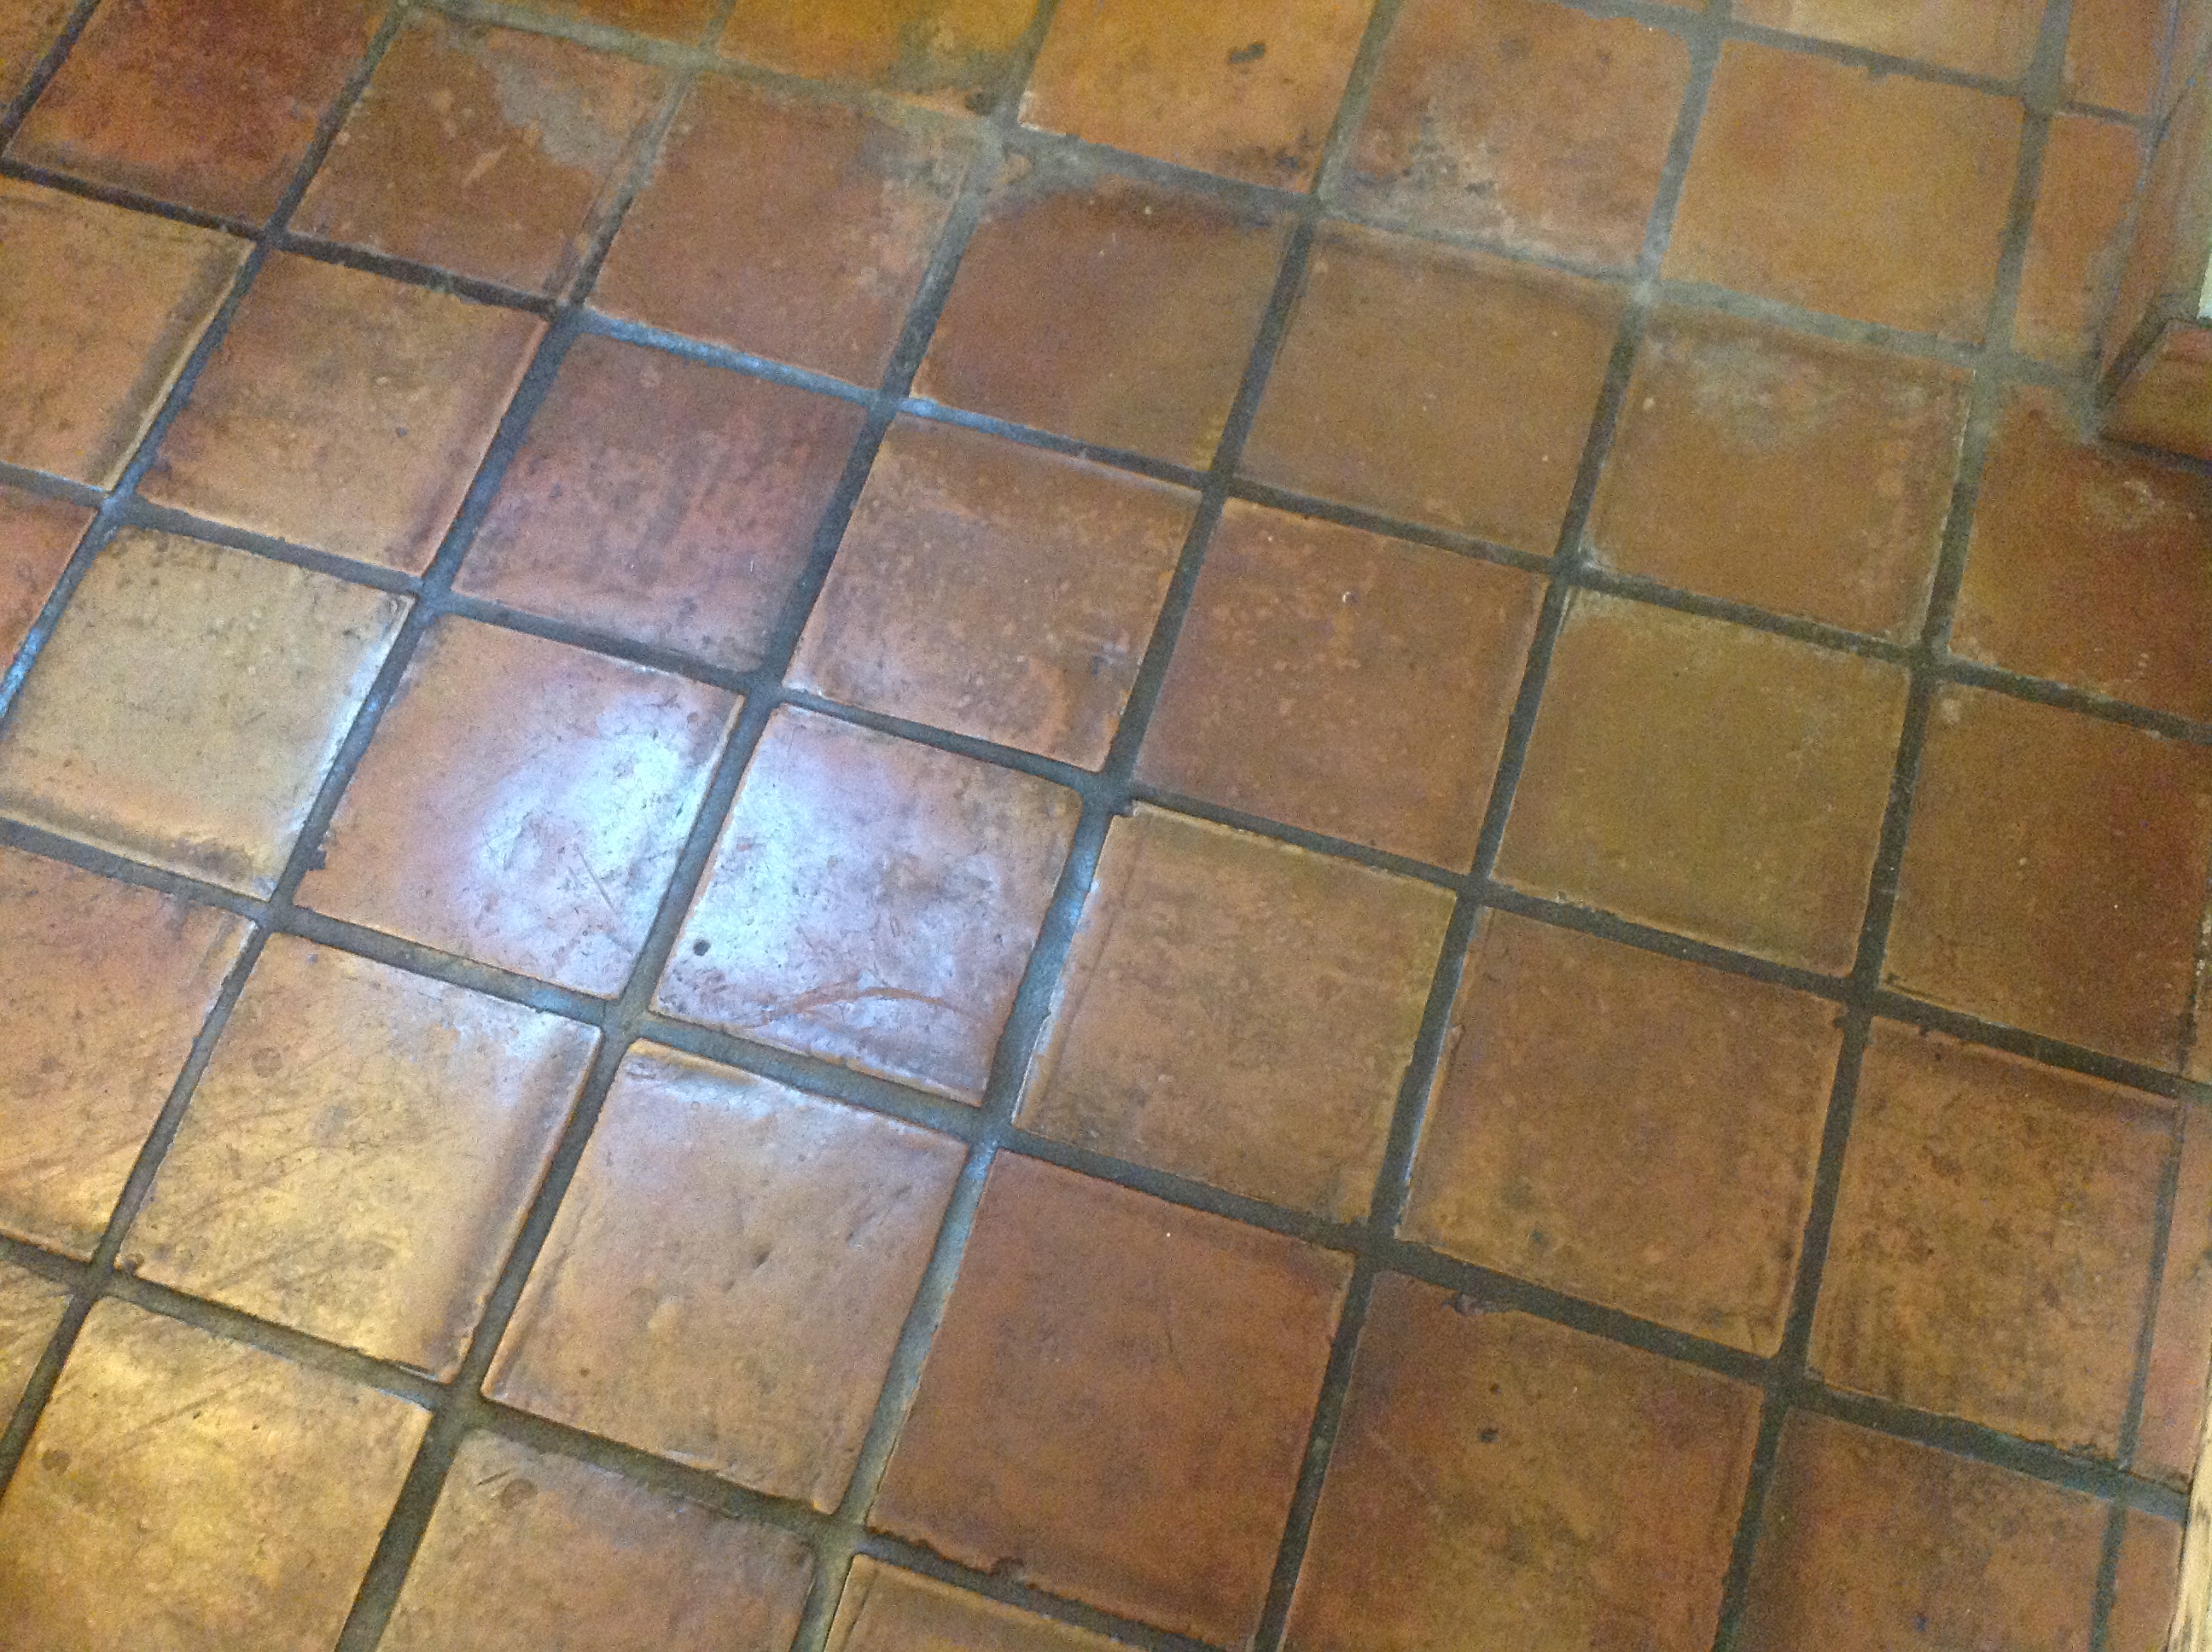 20 Years of Neglect Finally Caught Up To Your Super Saltillo Floor? | California Tile Restoration